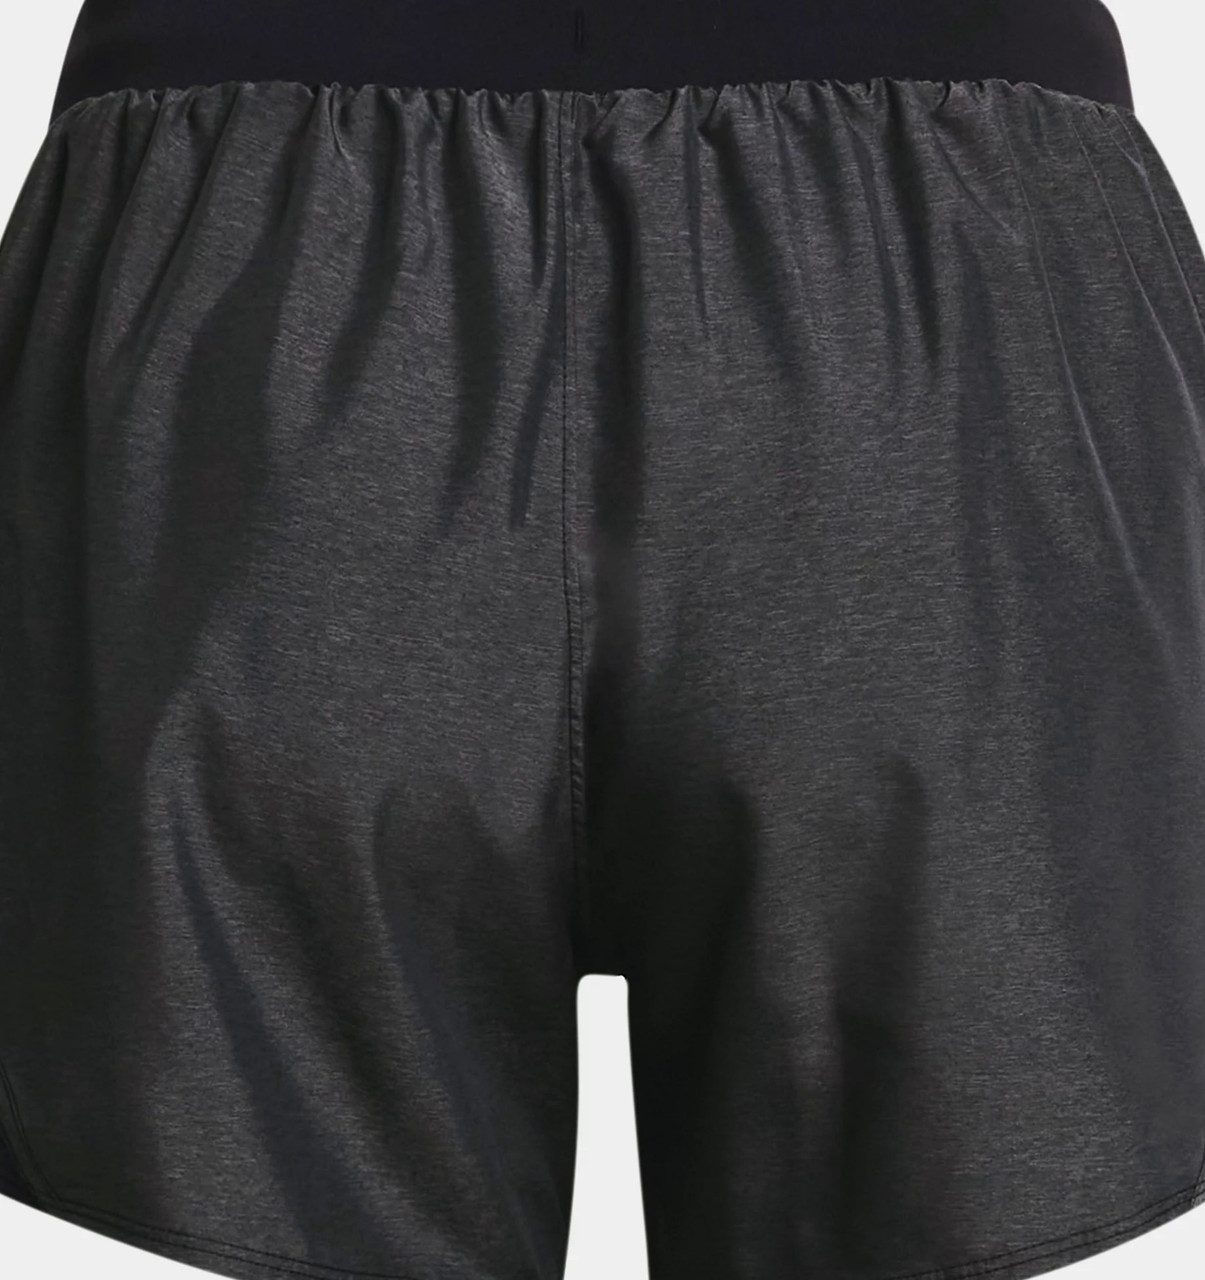 Under Armour Women's Fly by 2.0 Running Shorts $9.64